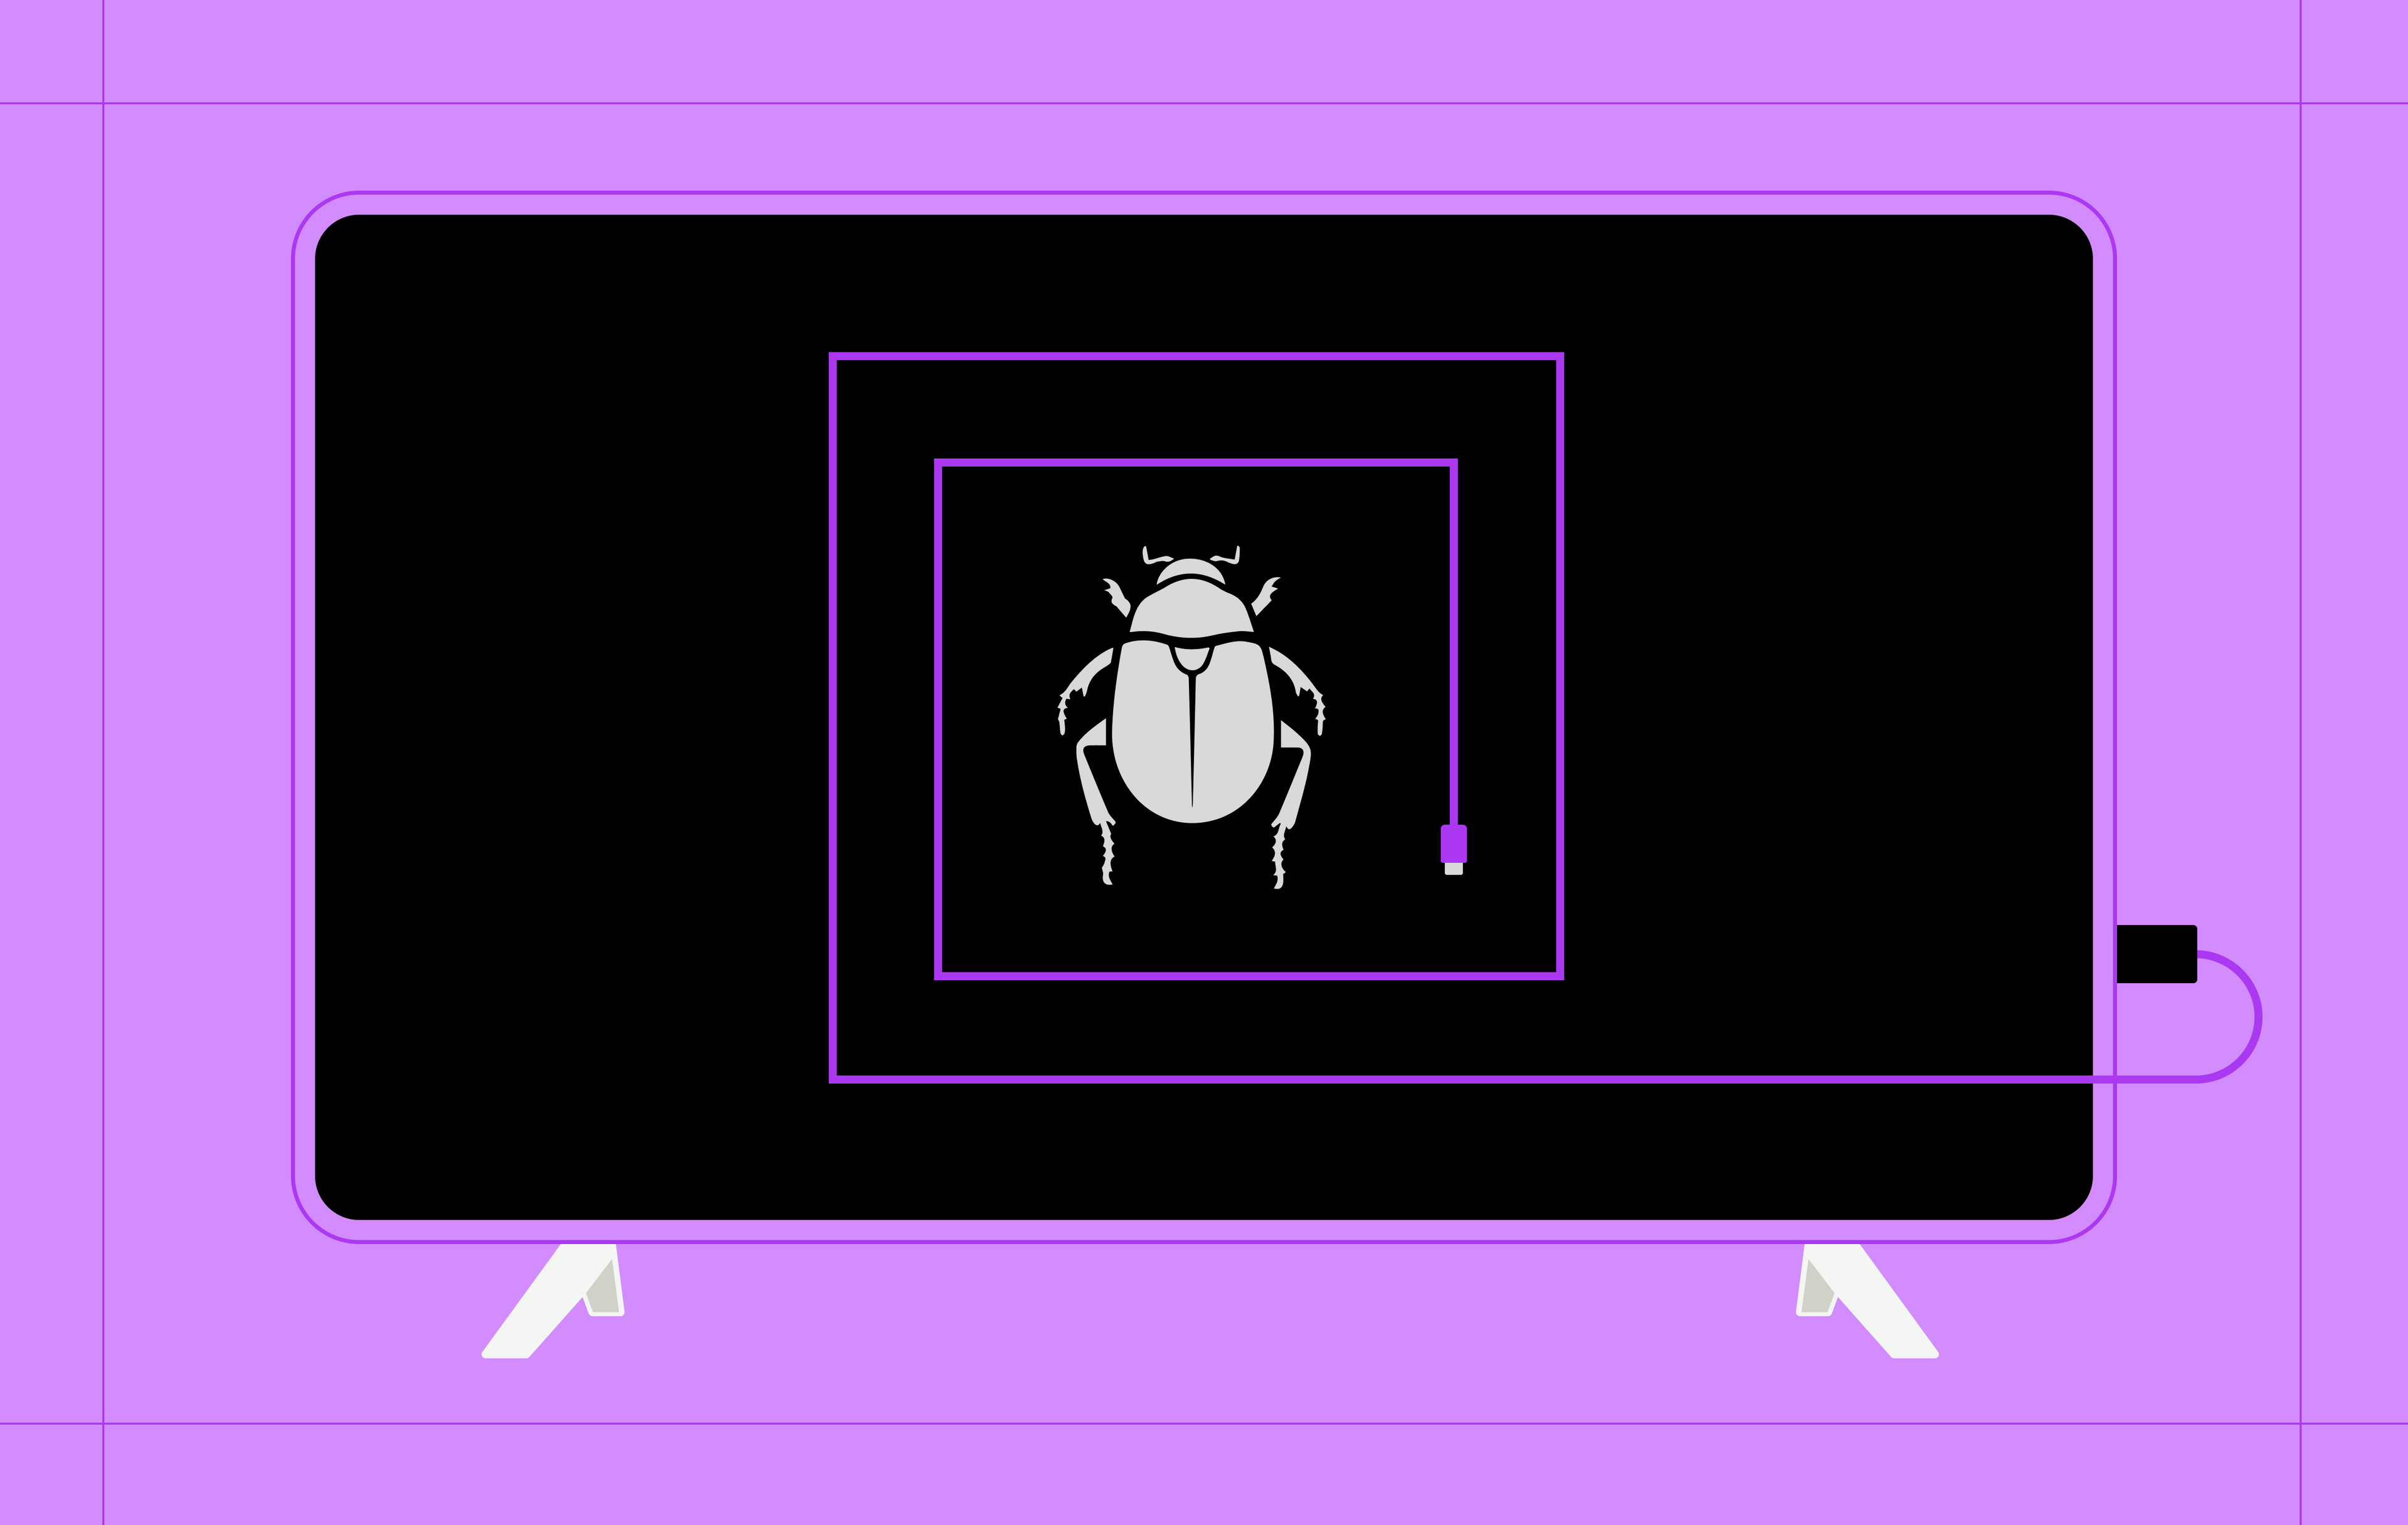 An illustration of a beetle displaying on a smart TV. A purple cord is plugged in to the TV and winds its way around the beetle.